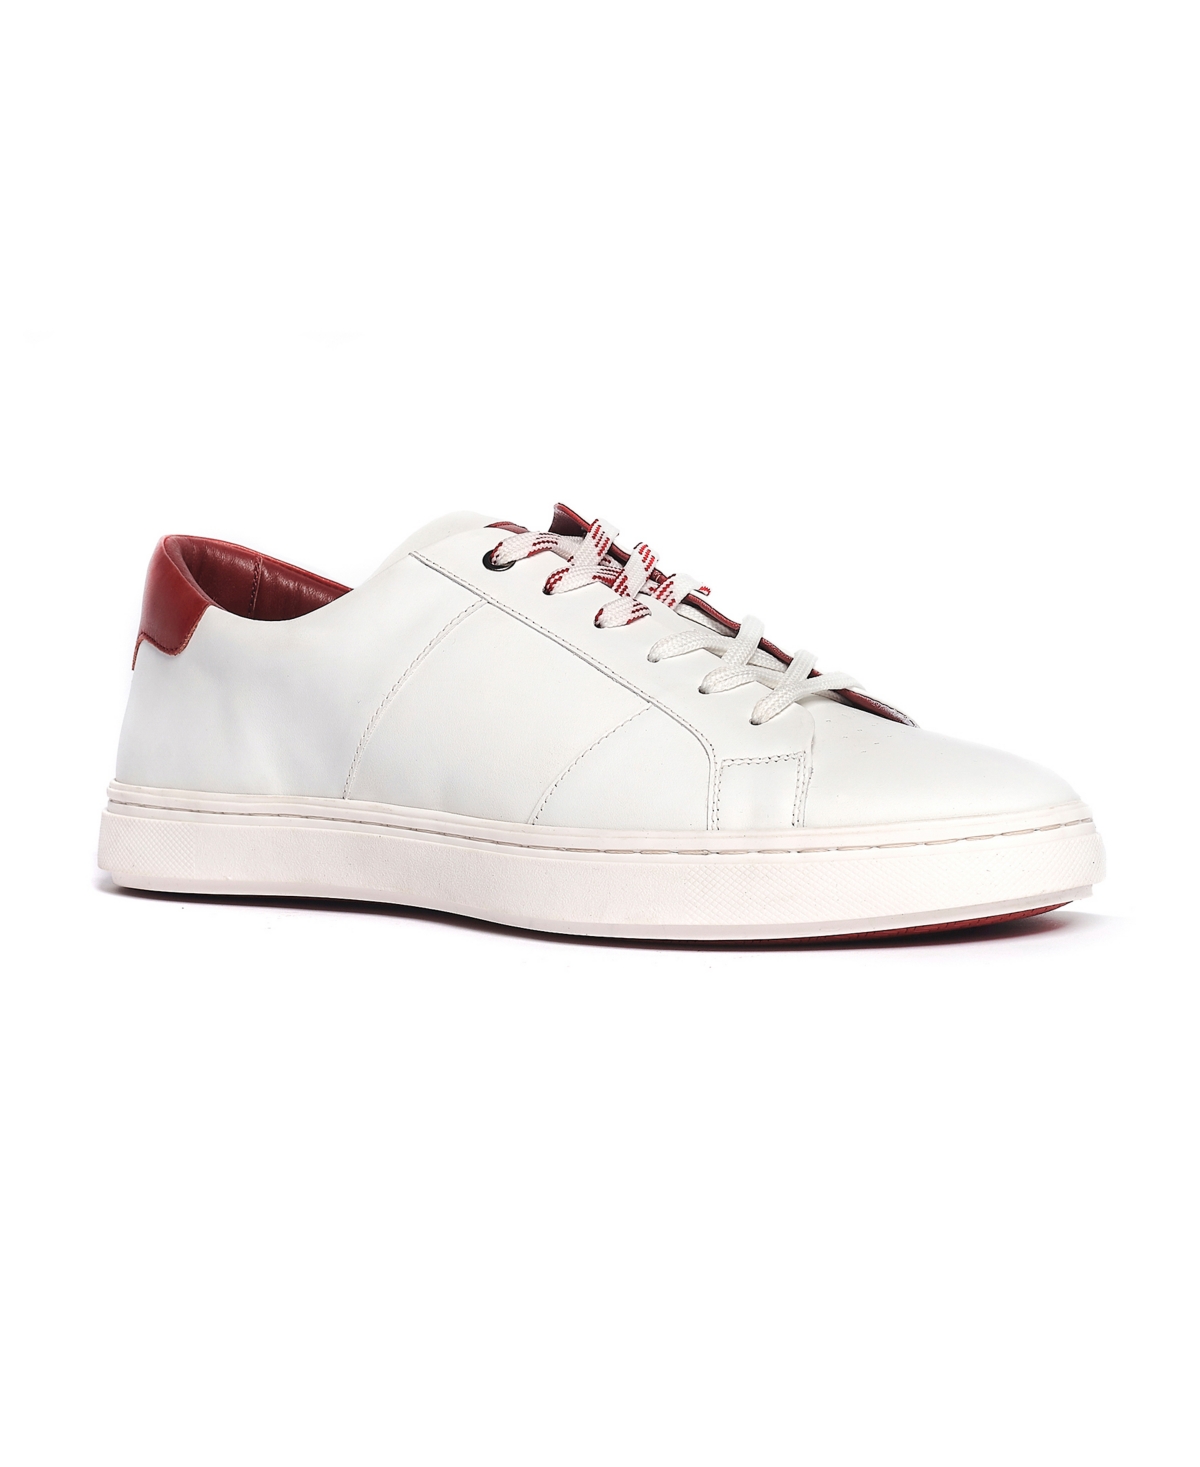 Anthony Veer Men's Kips Low-top Fashion Sneakers In White